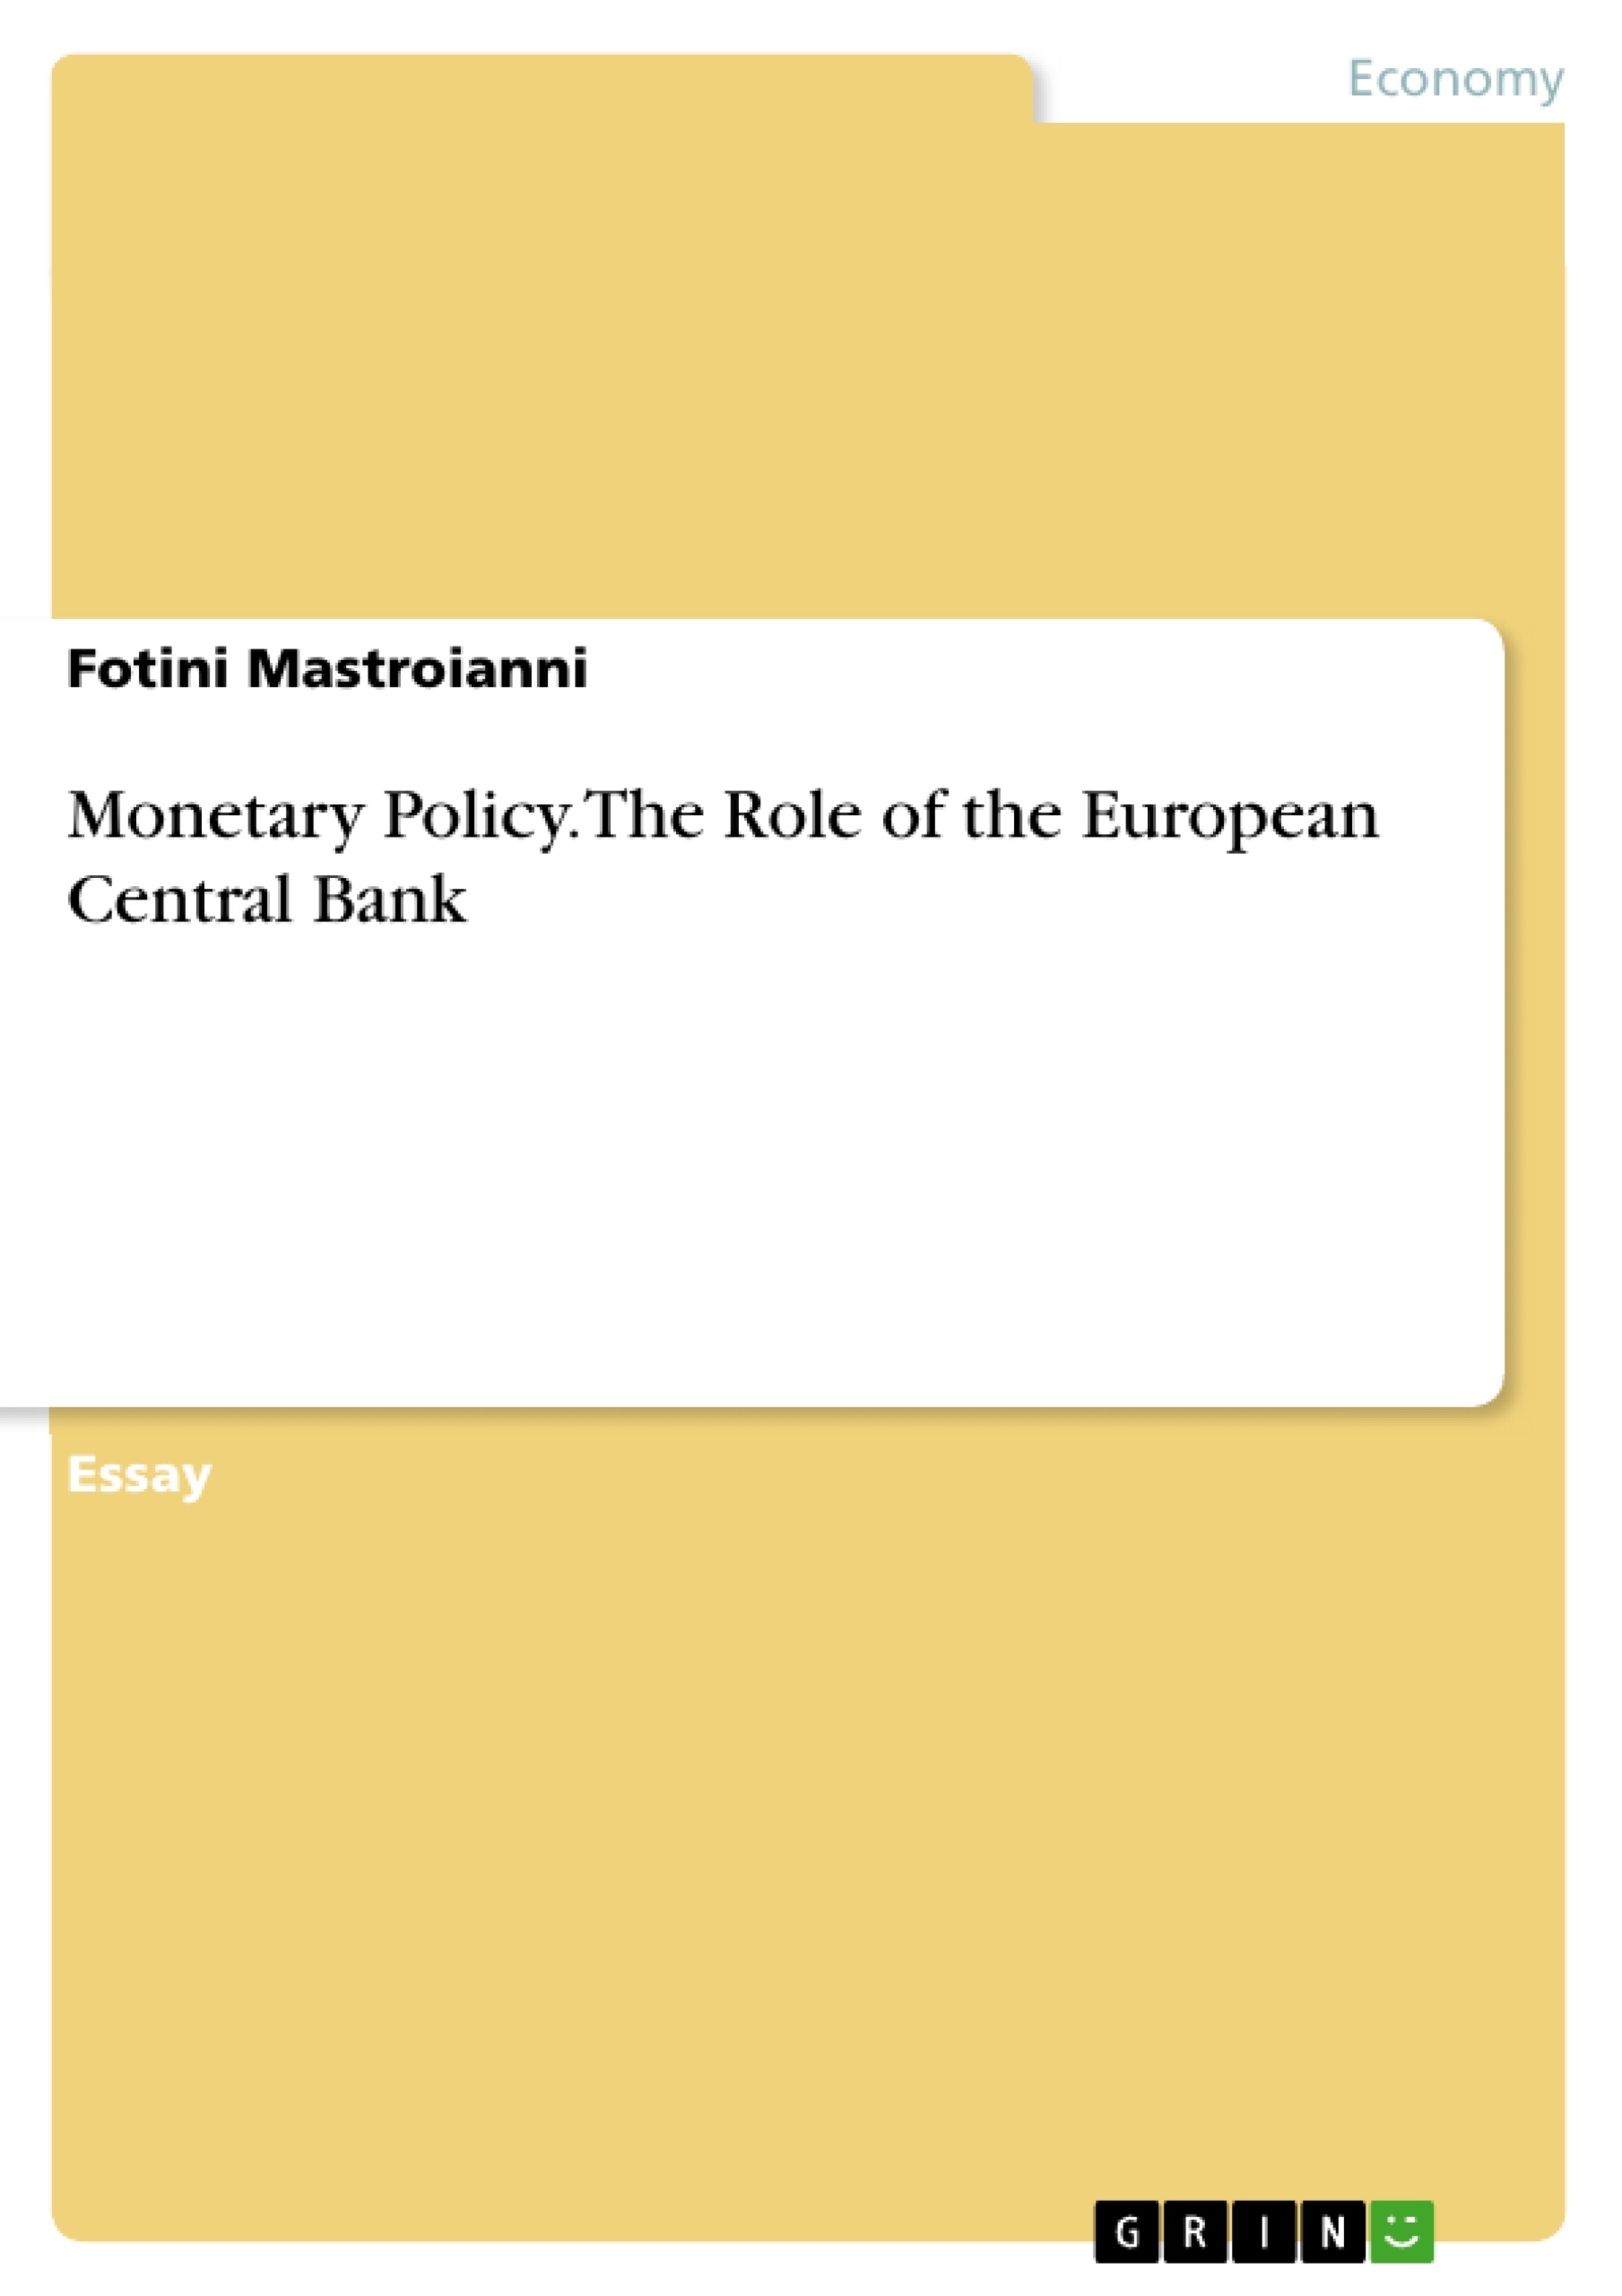 Título: Monetary Policy. The Role of the European Central Bank